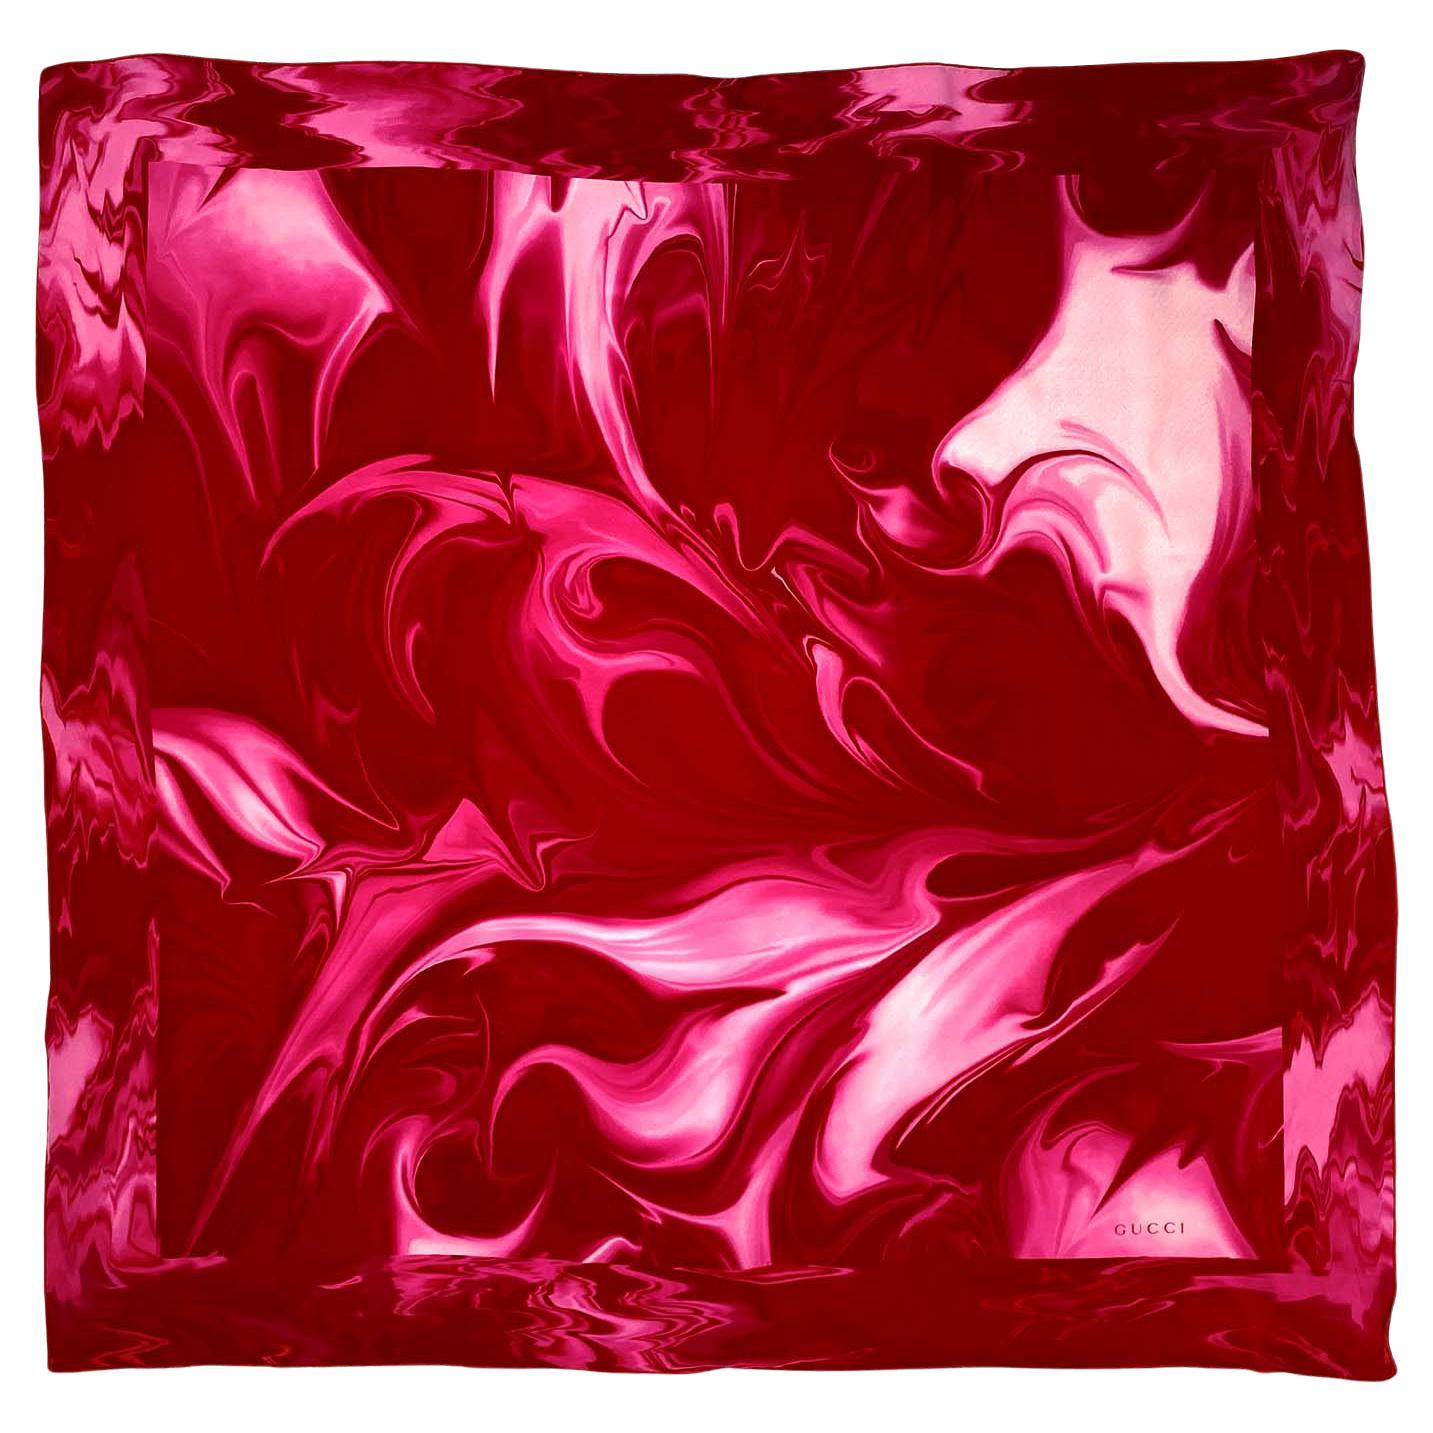 S/S 2001 Gucci by Tom Ford Lava Print Pink Silk Square Scarf For Sale